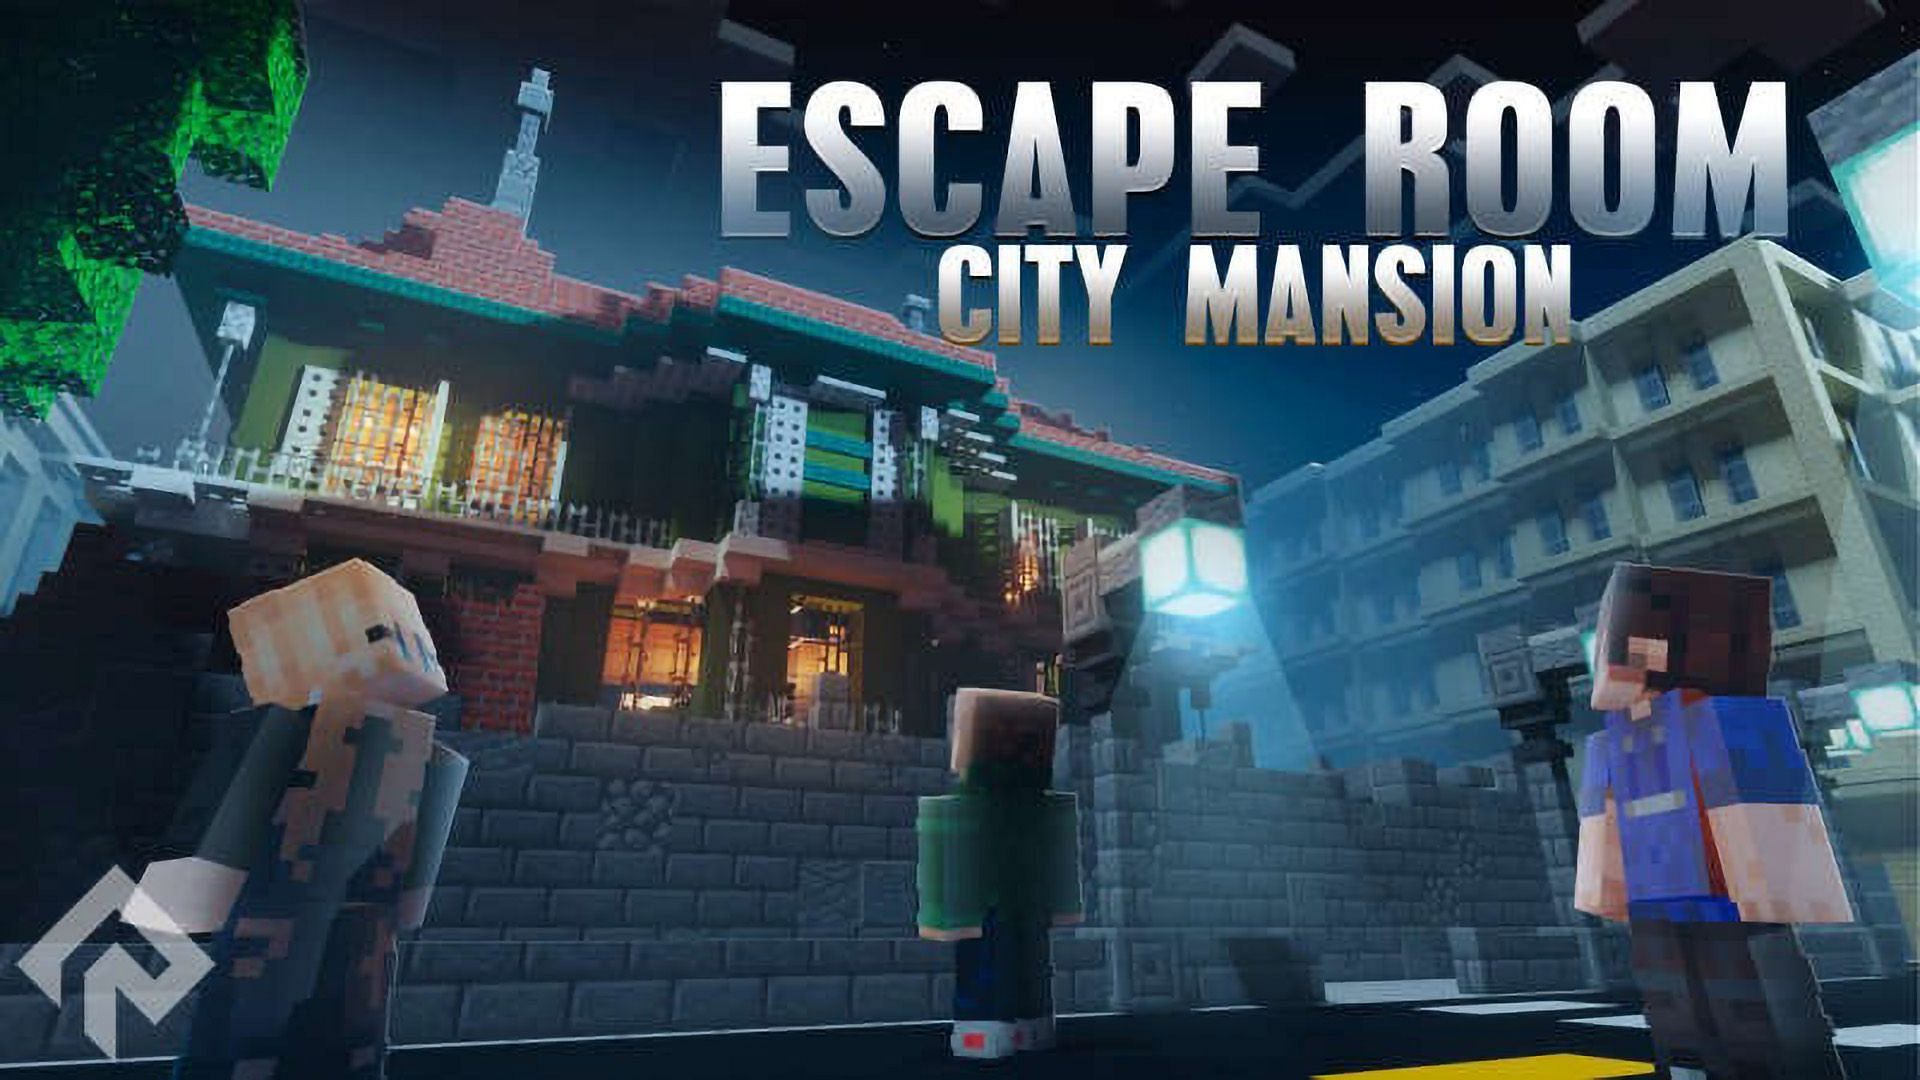 Escape the Backrooms by RareLoot (Minecraft Marketplace Map) - Minecraft  Marketplace